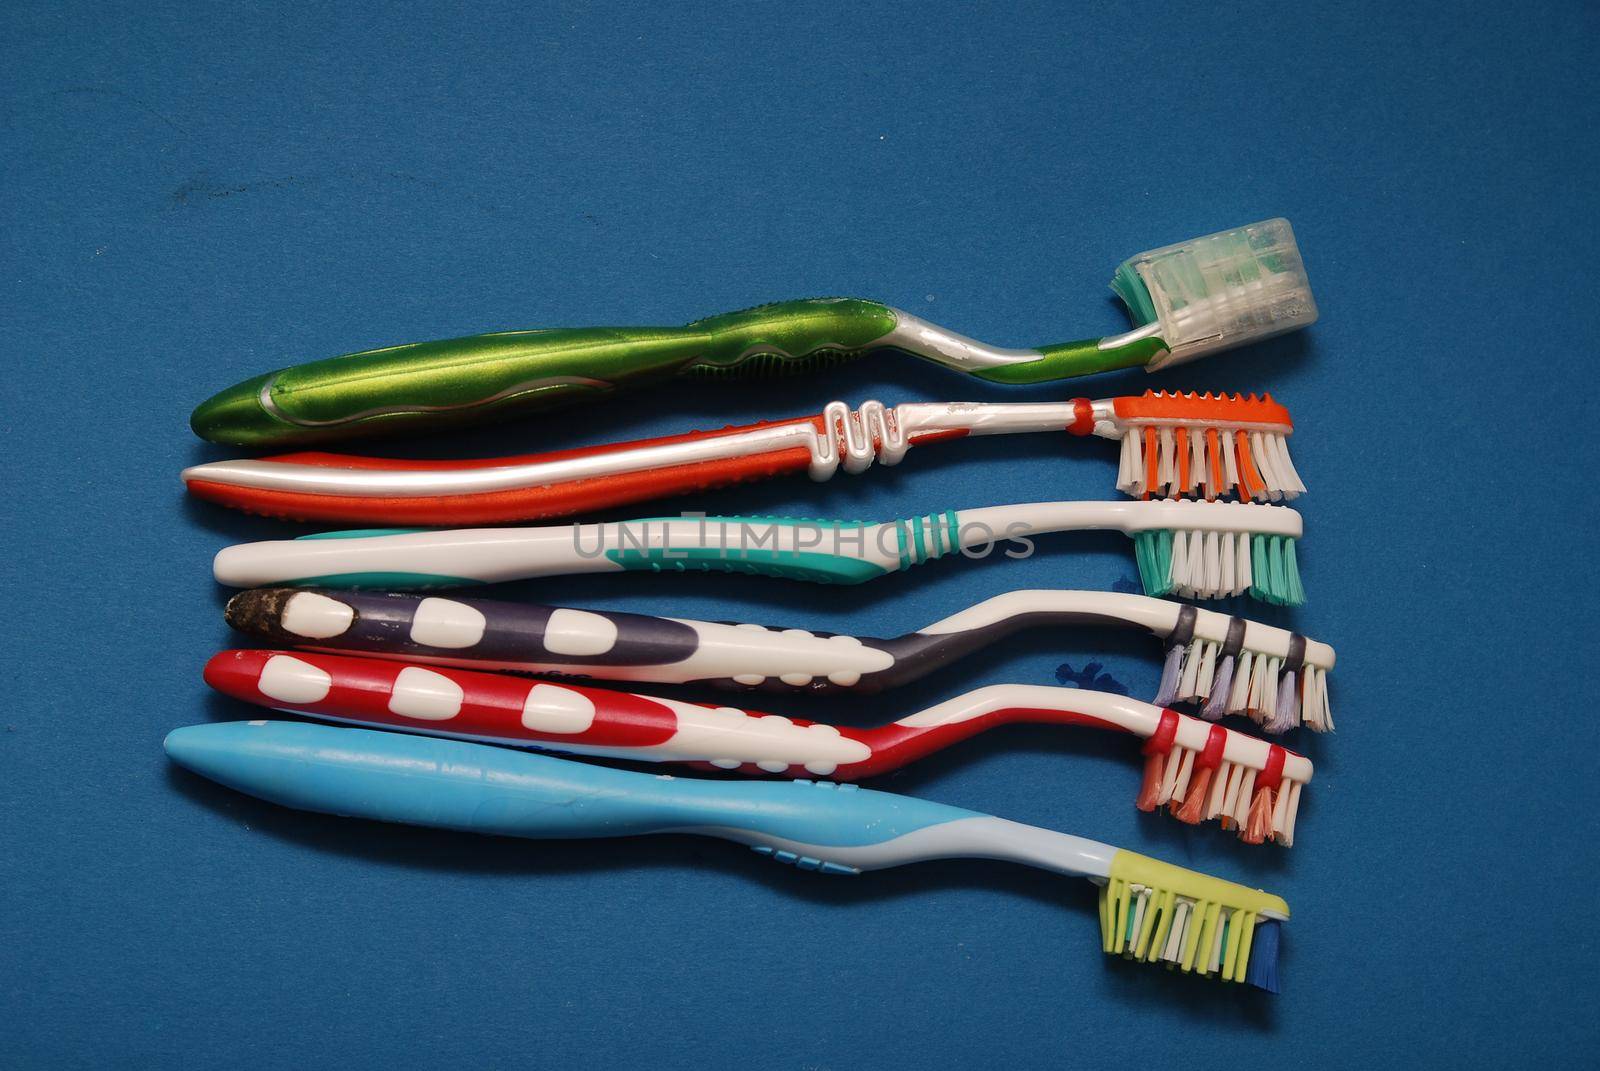 tooth brush on blue background